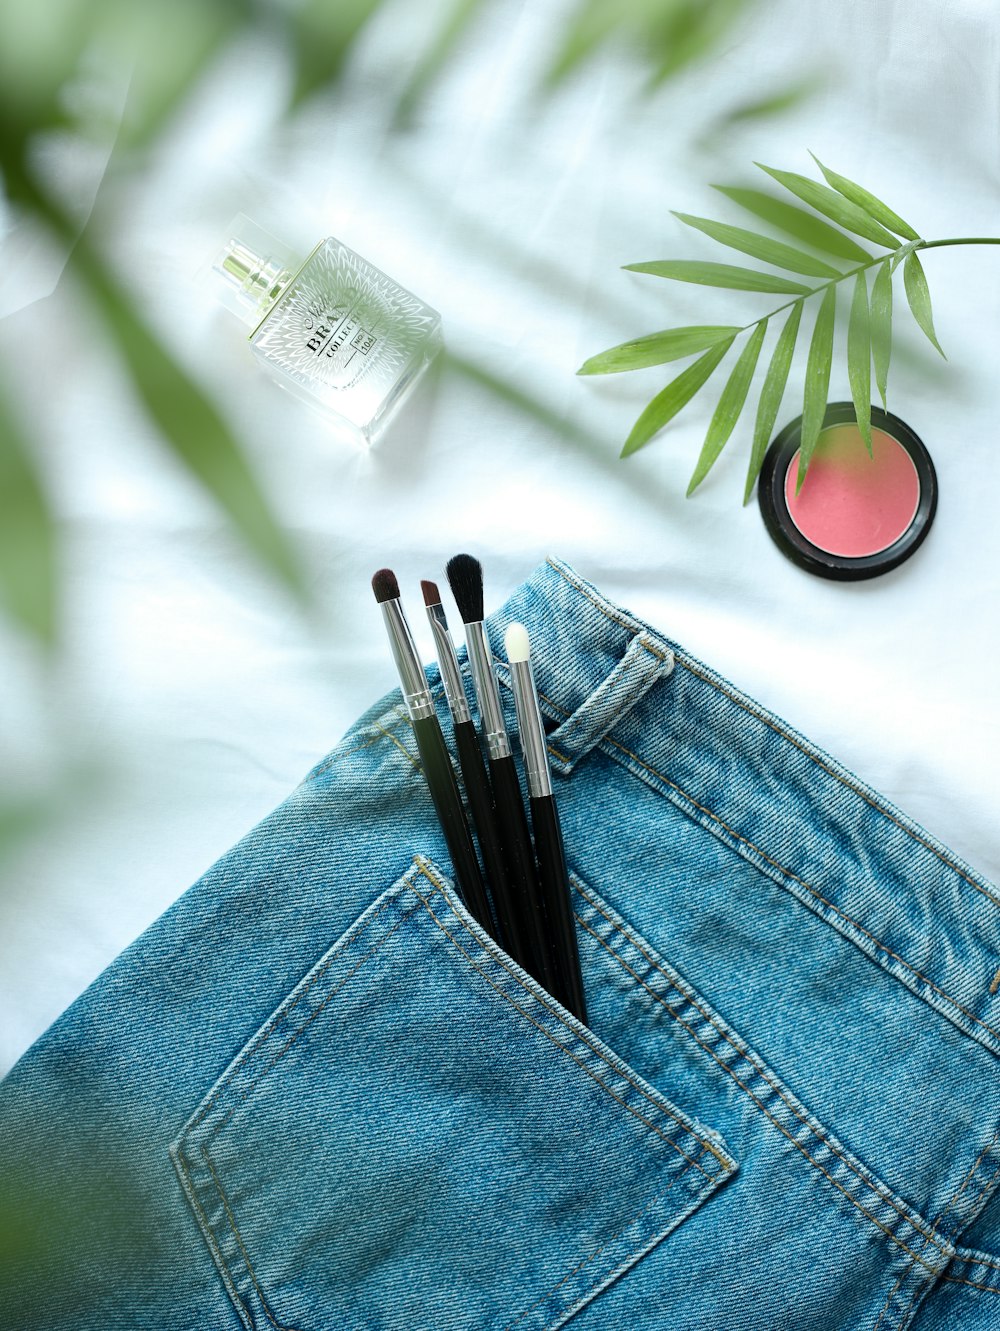 a pair of jeans with makeup brushes in the pocket